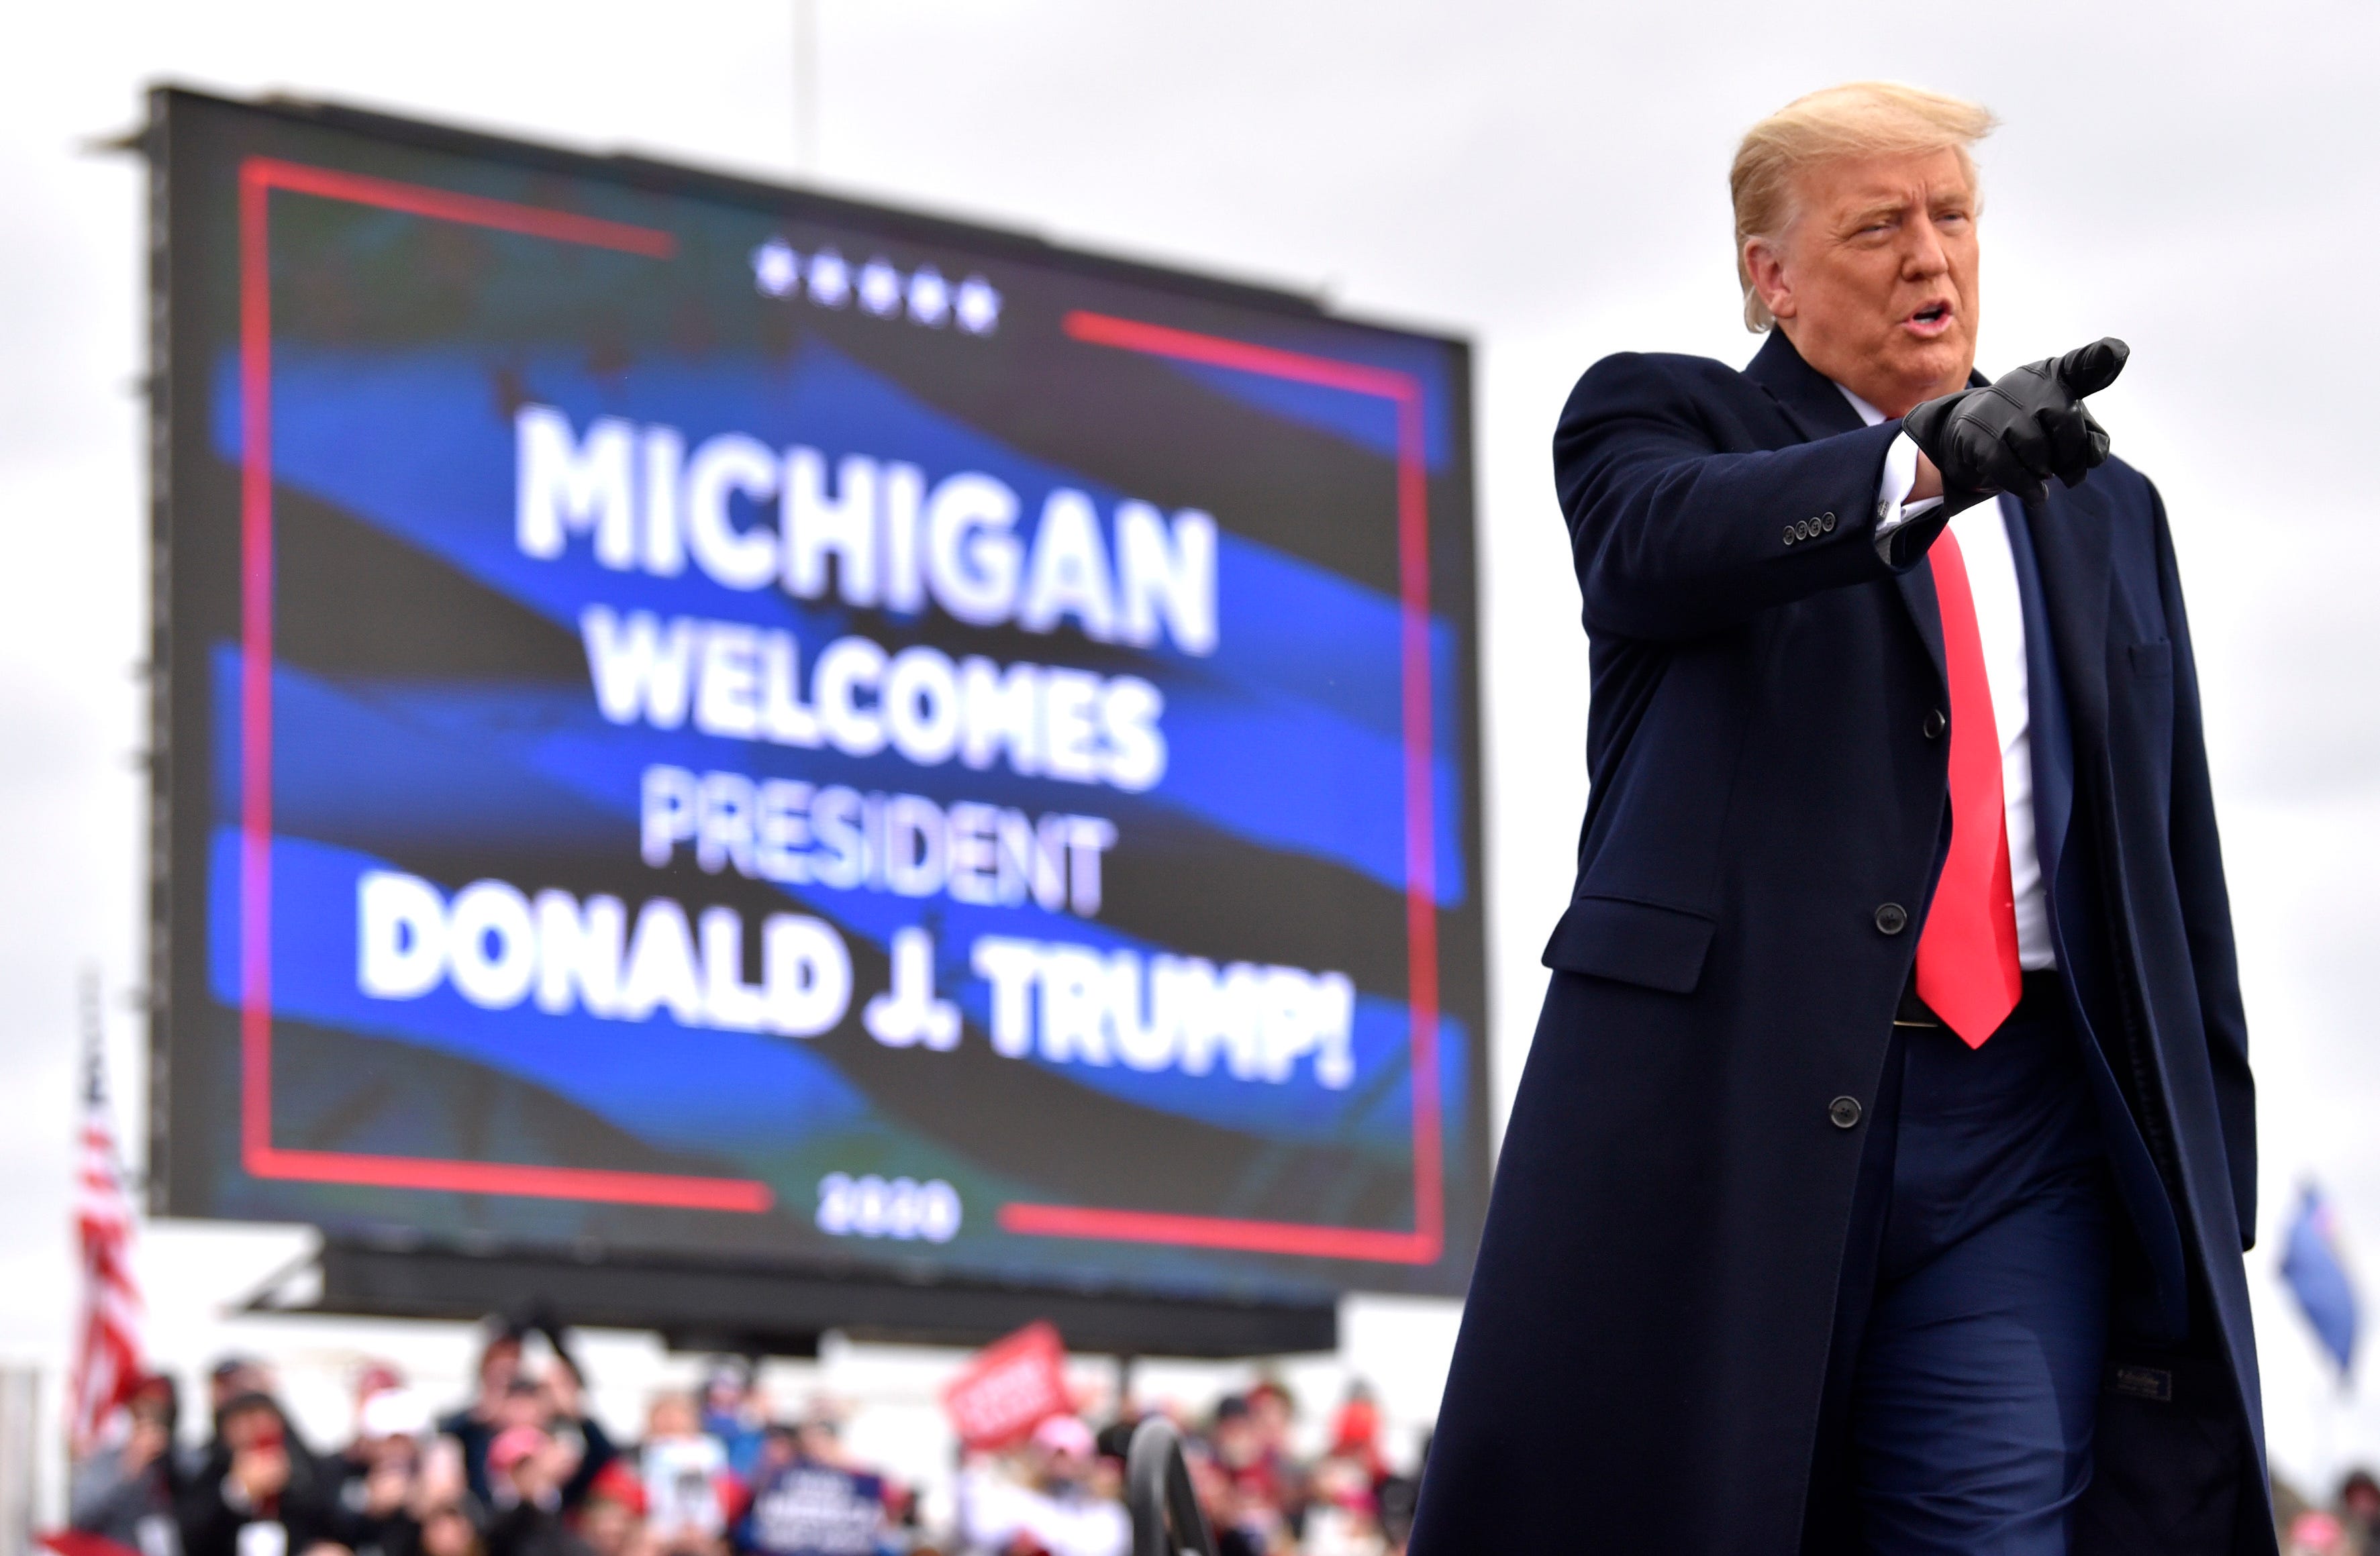 U.S. President Donald Trump takes the stage to speak to supporters at the Oakland International Airport in Waterford Twp., Friday, October 30, 2020, for his Make America Great Again Victory Rally.